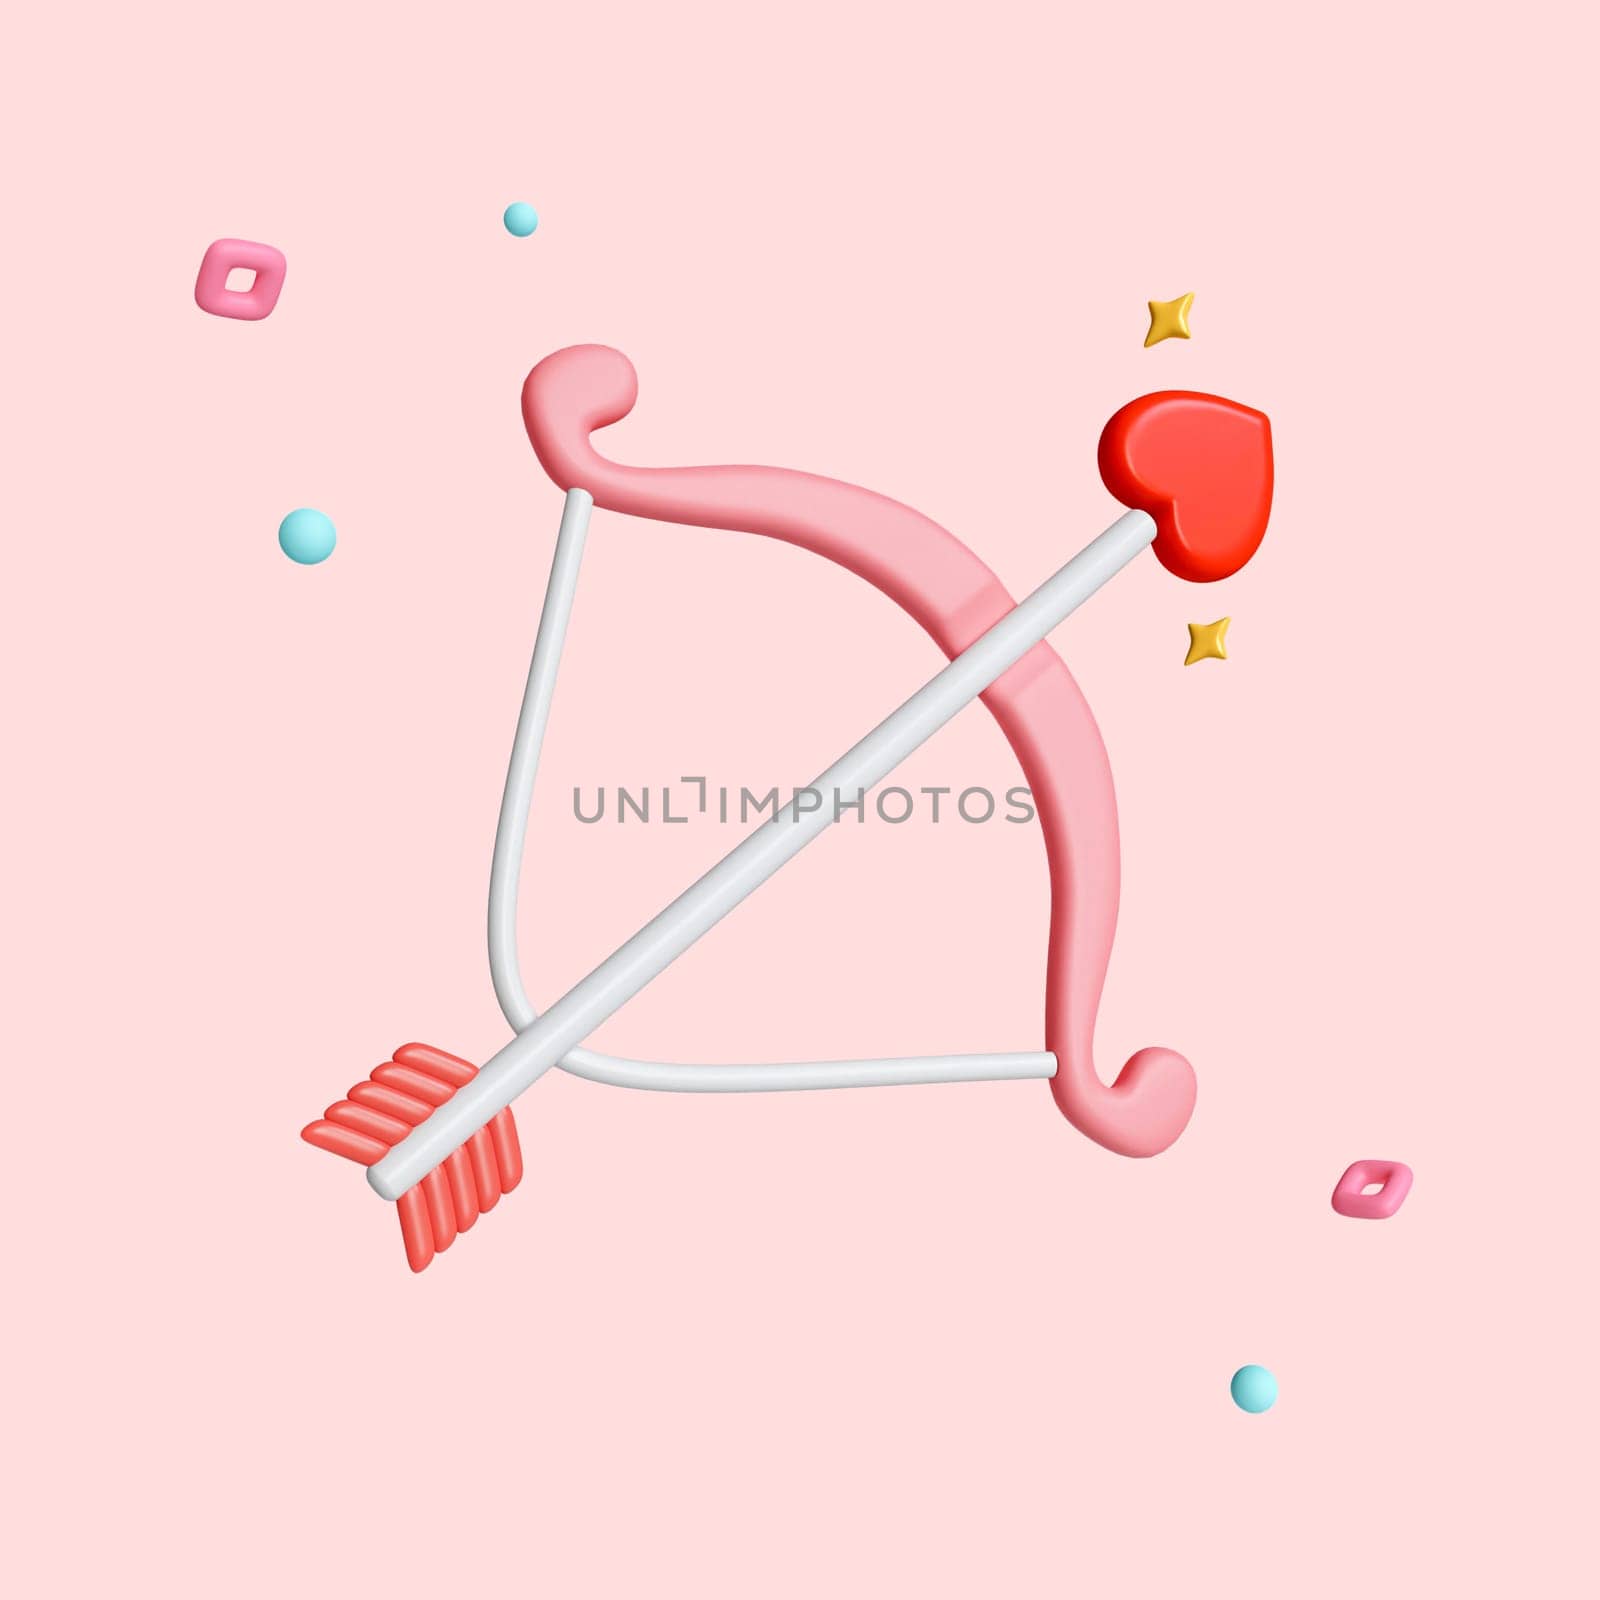 Cupid bow with heart love arrow icon Isolated on pink background with clipping path. Valentine's Day concept 3d render illustration.